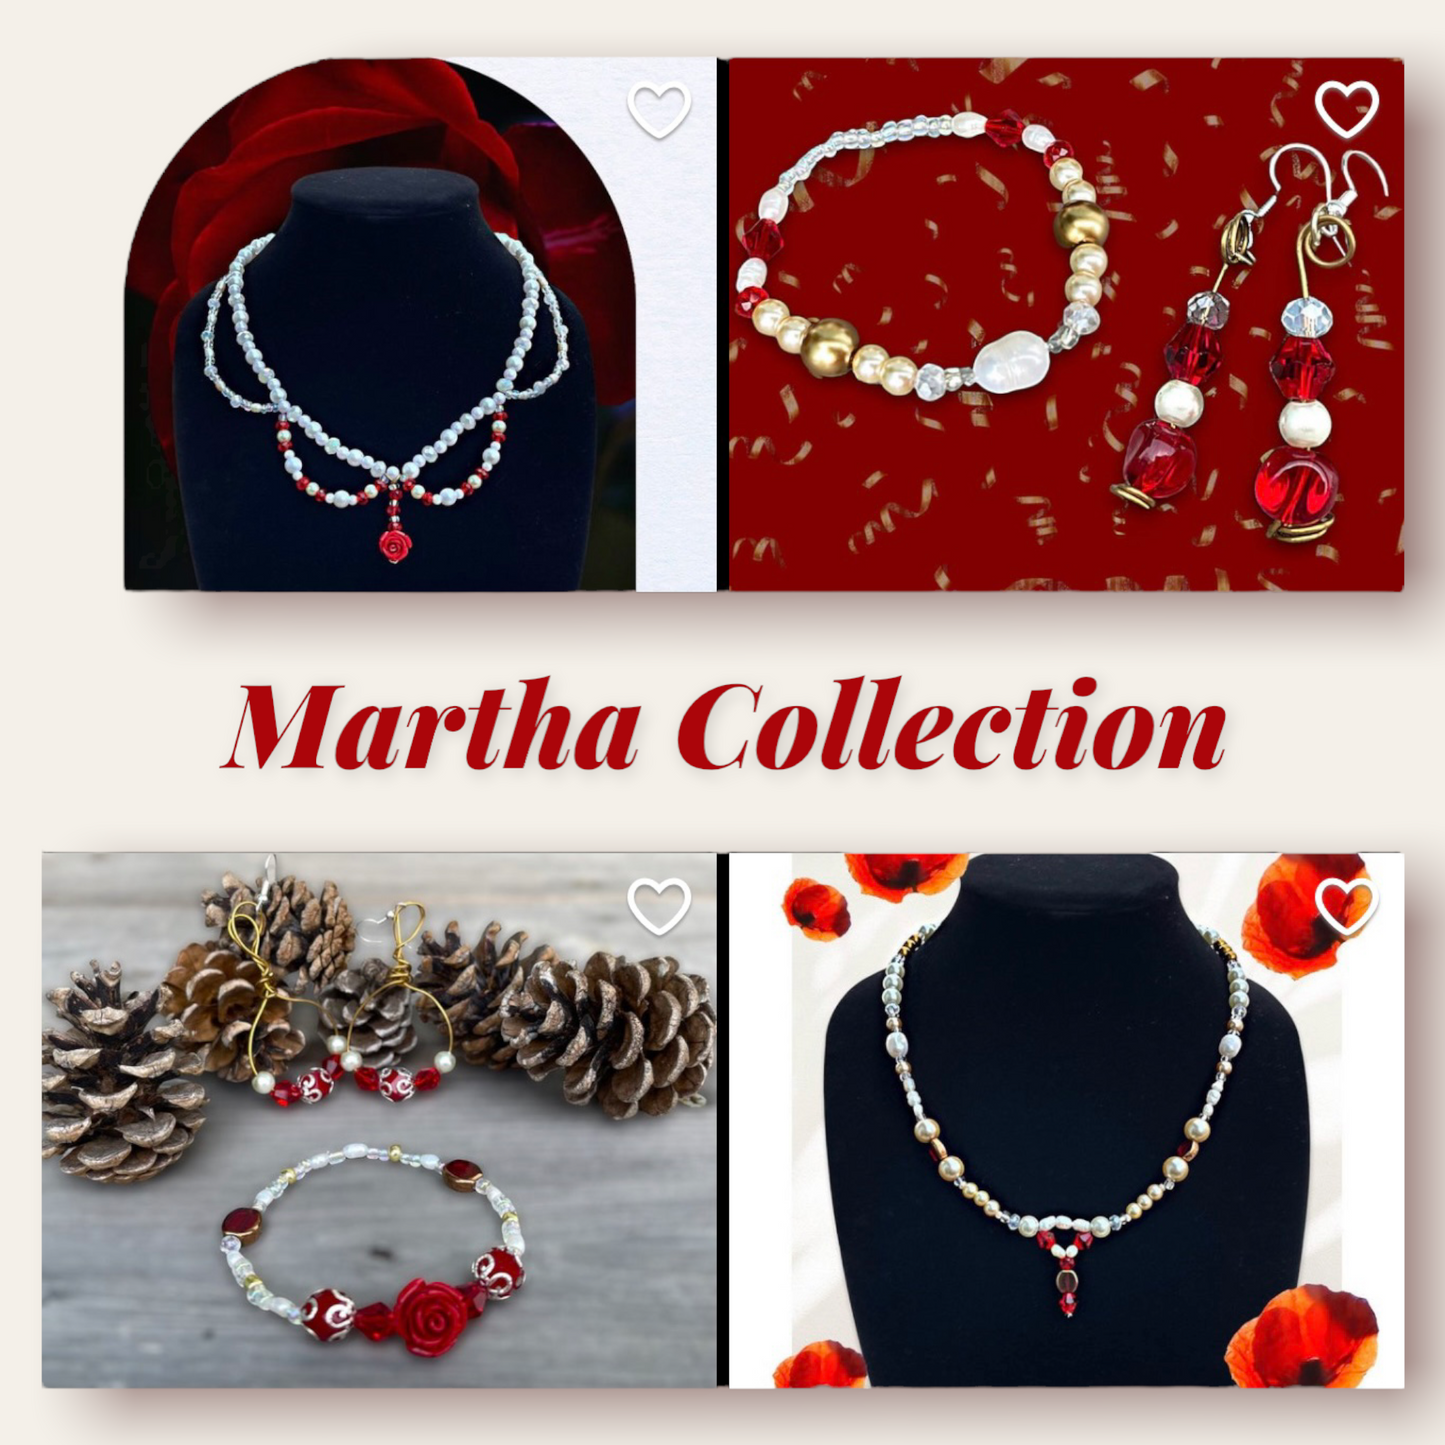 The Entire Martha Collection